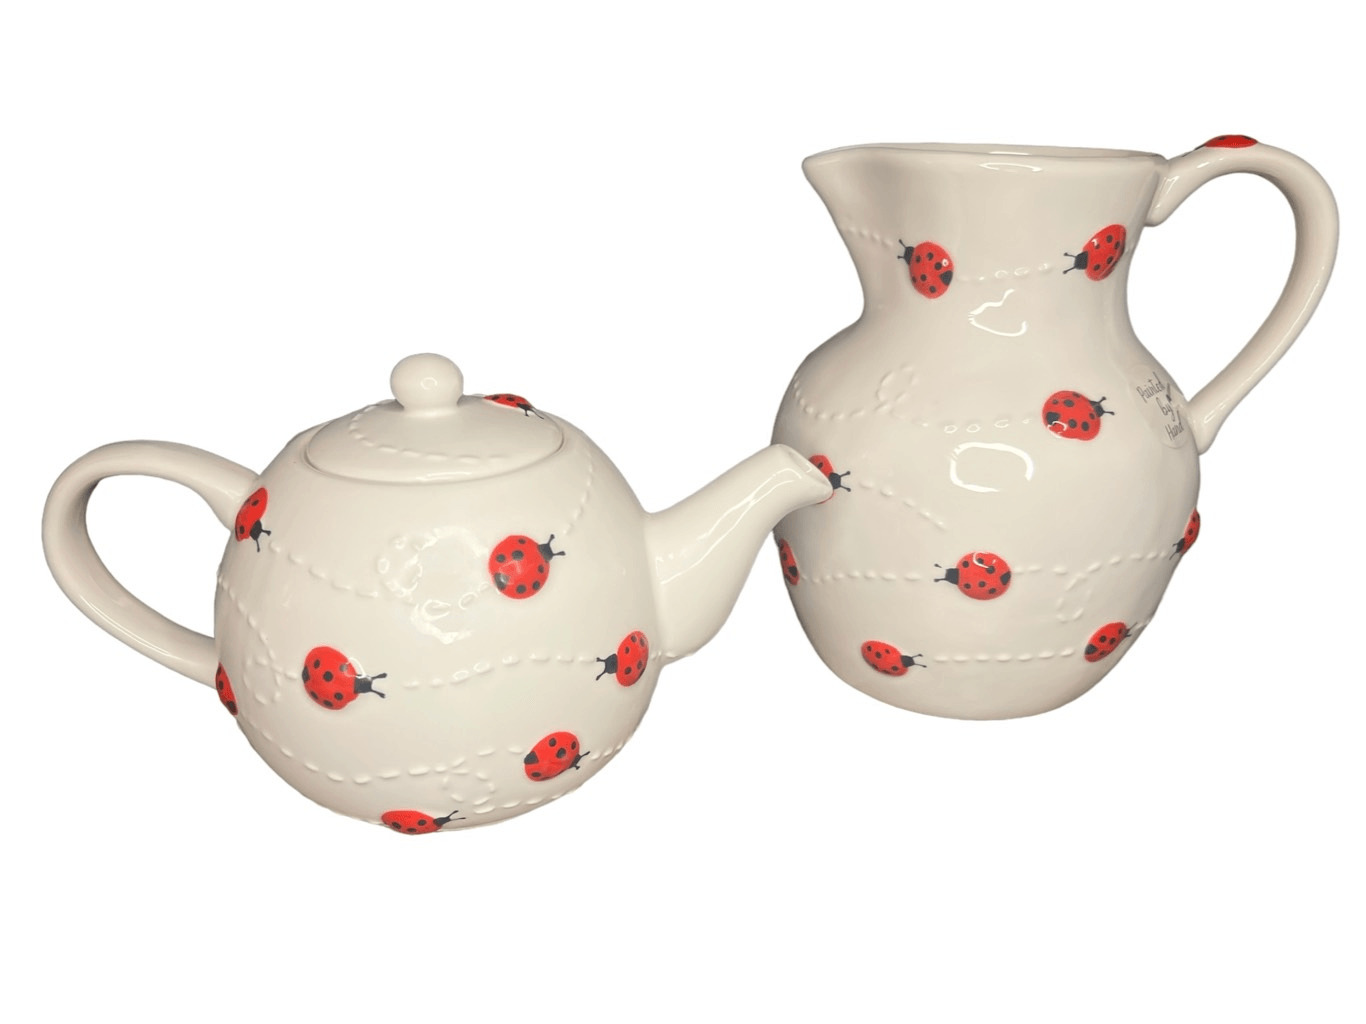 NEW LANG Hand Painted Ladybug Teapot and Pitcher